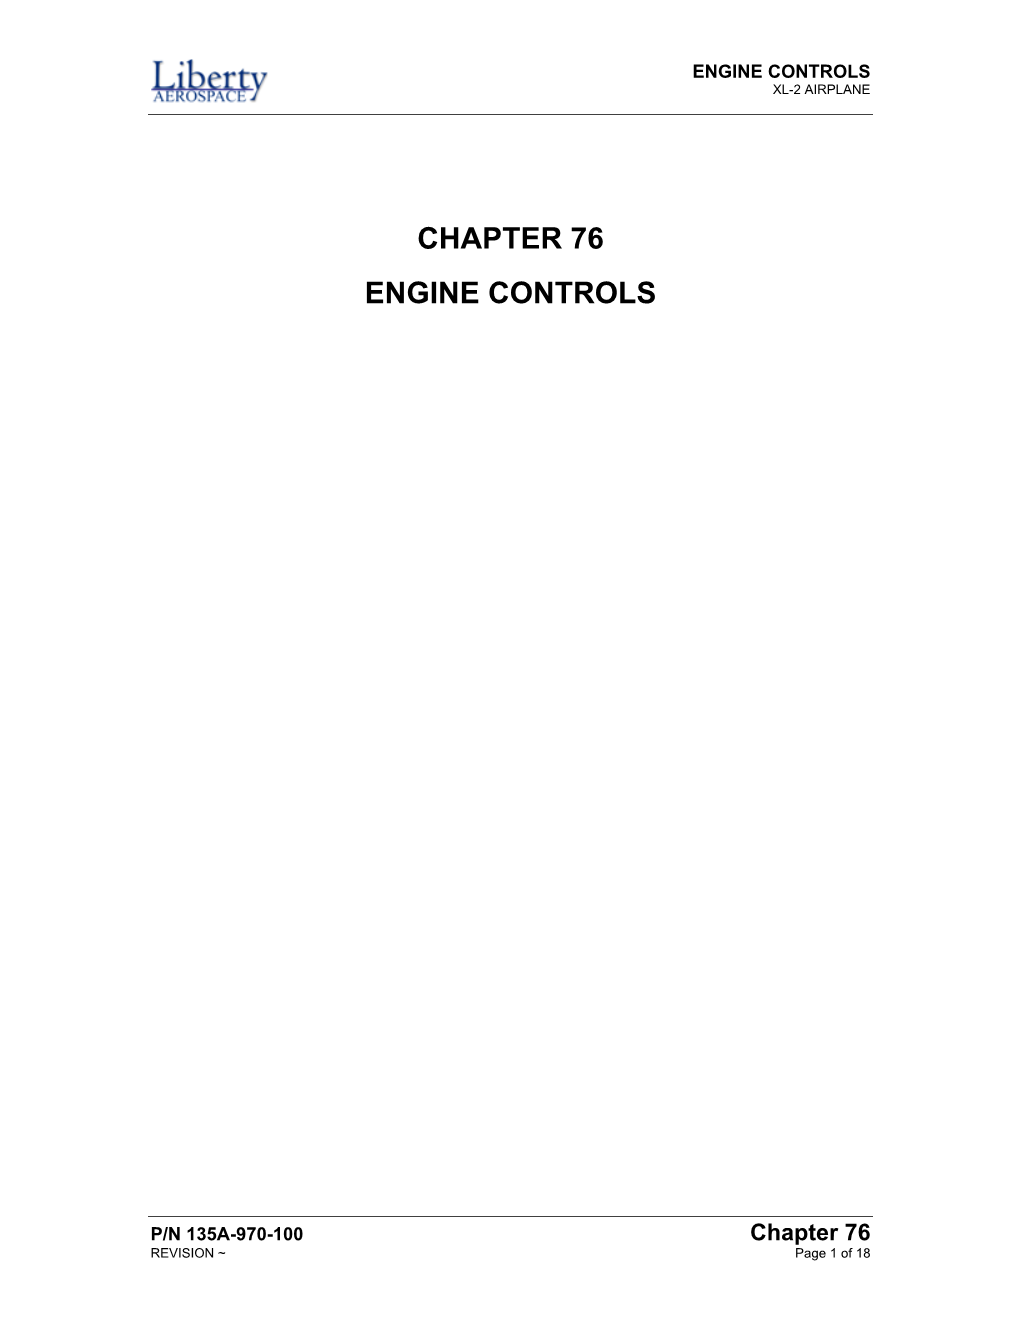 Chapter 76 Engine Controls